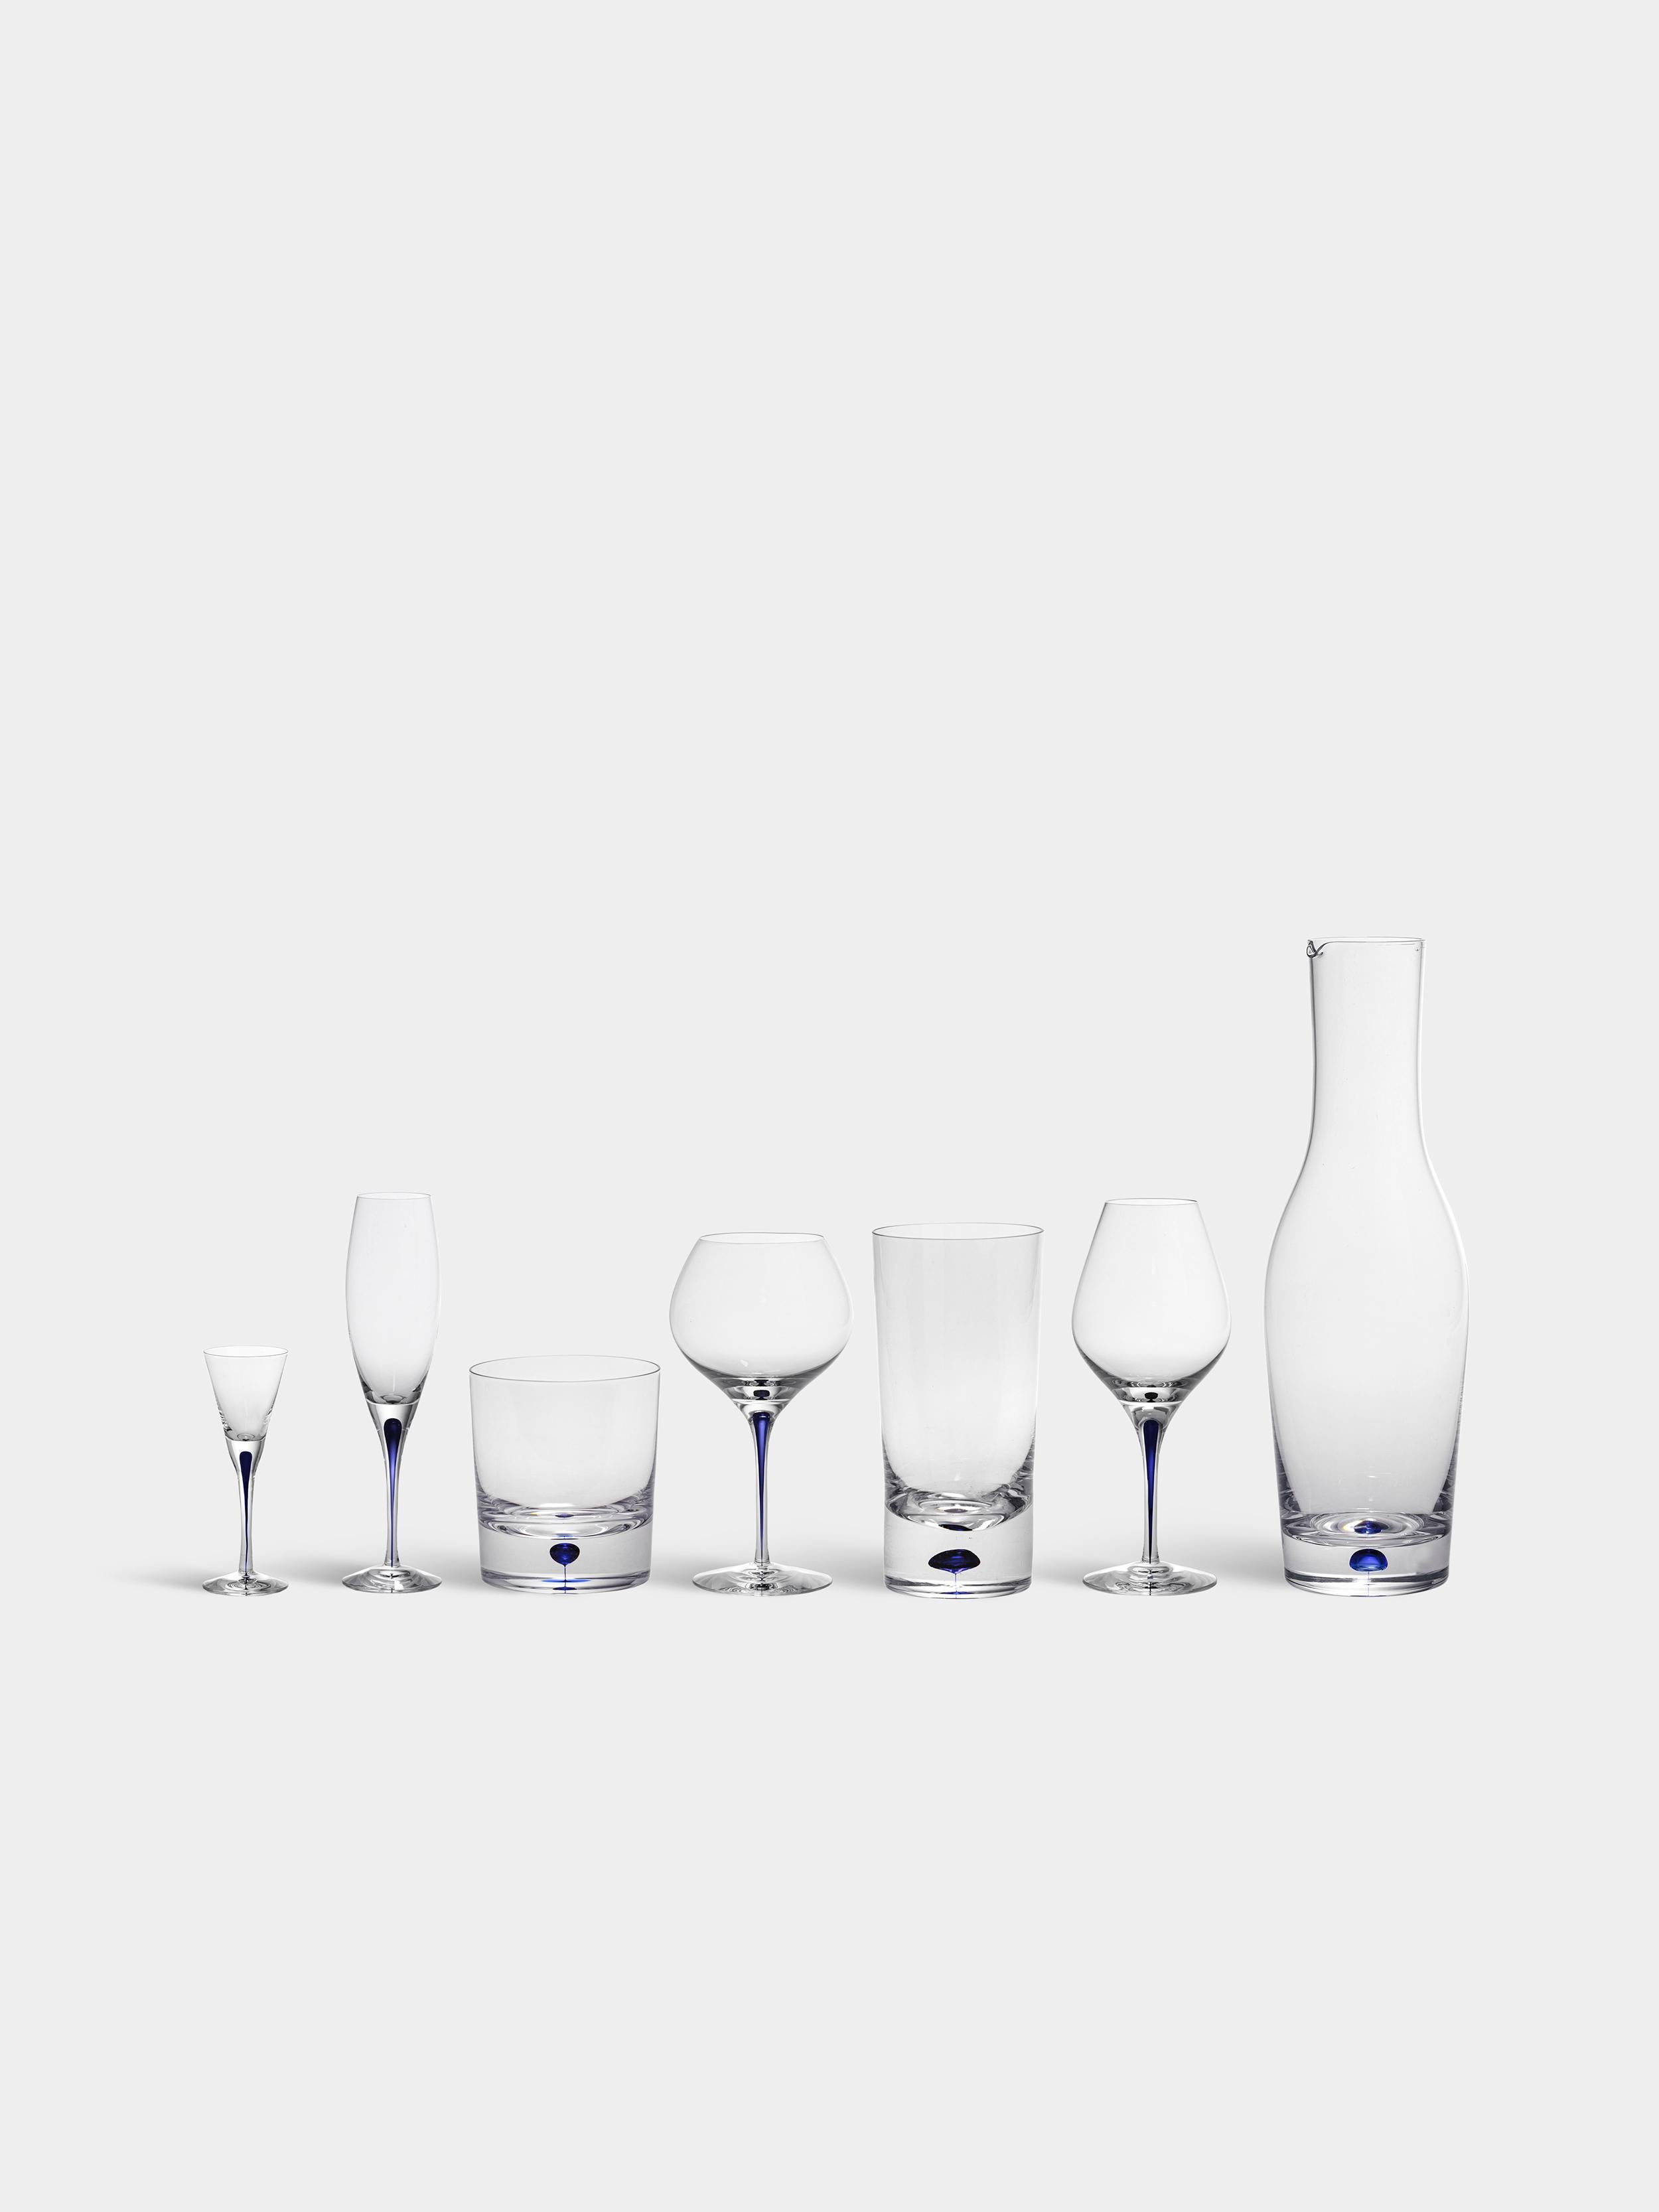 Intermezzo Snaps from Orrefors was designed in 1984. The glass, which holds 2 oz, is ideal for serving spirits. Intermezzo Snaps is mouth-blown in Sweden by expert glassblowers and has a drop of blue sealed inside the stem – an innovation based on